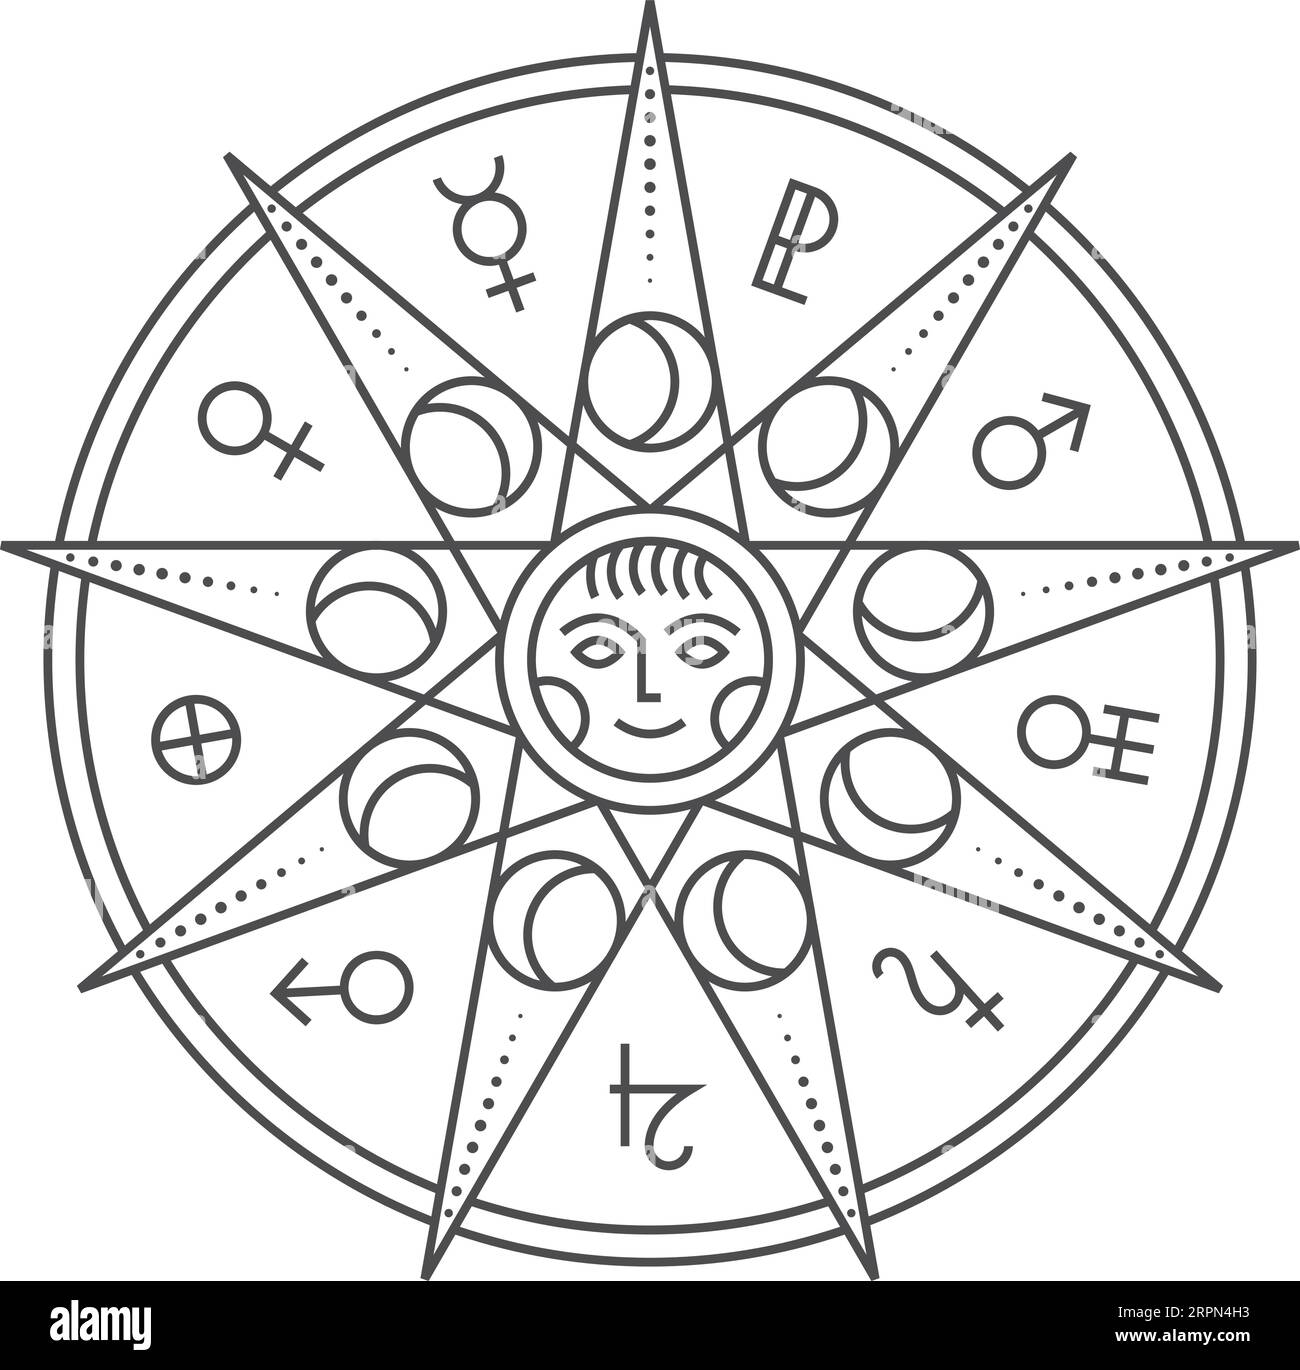 Esoteric sun and astrology symbol. Moon cycle sign Stock Vector